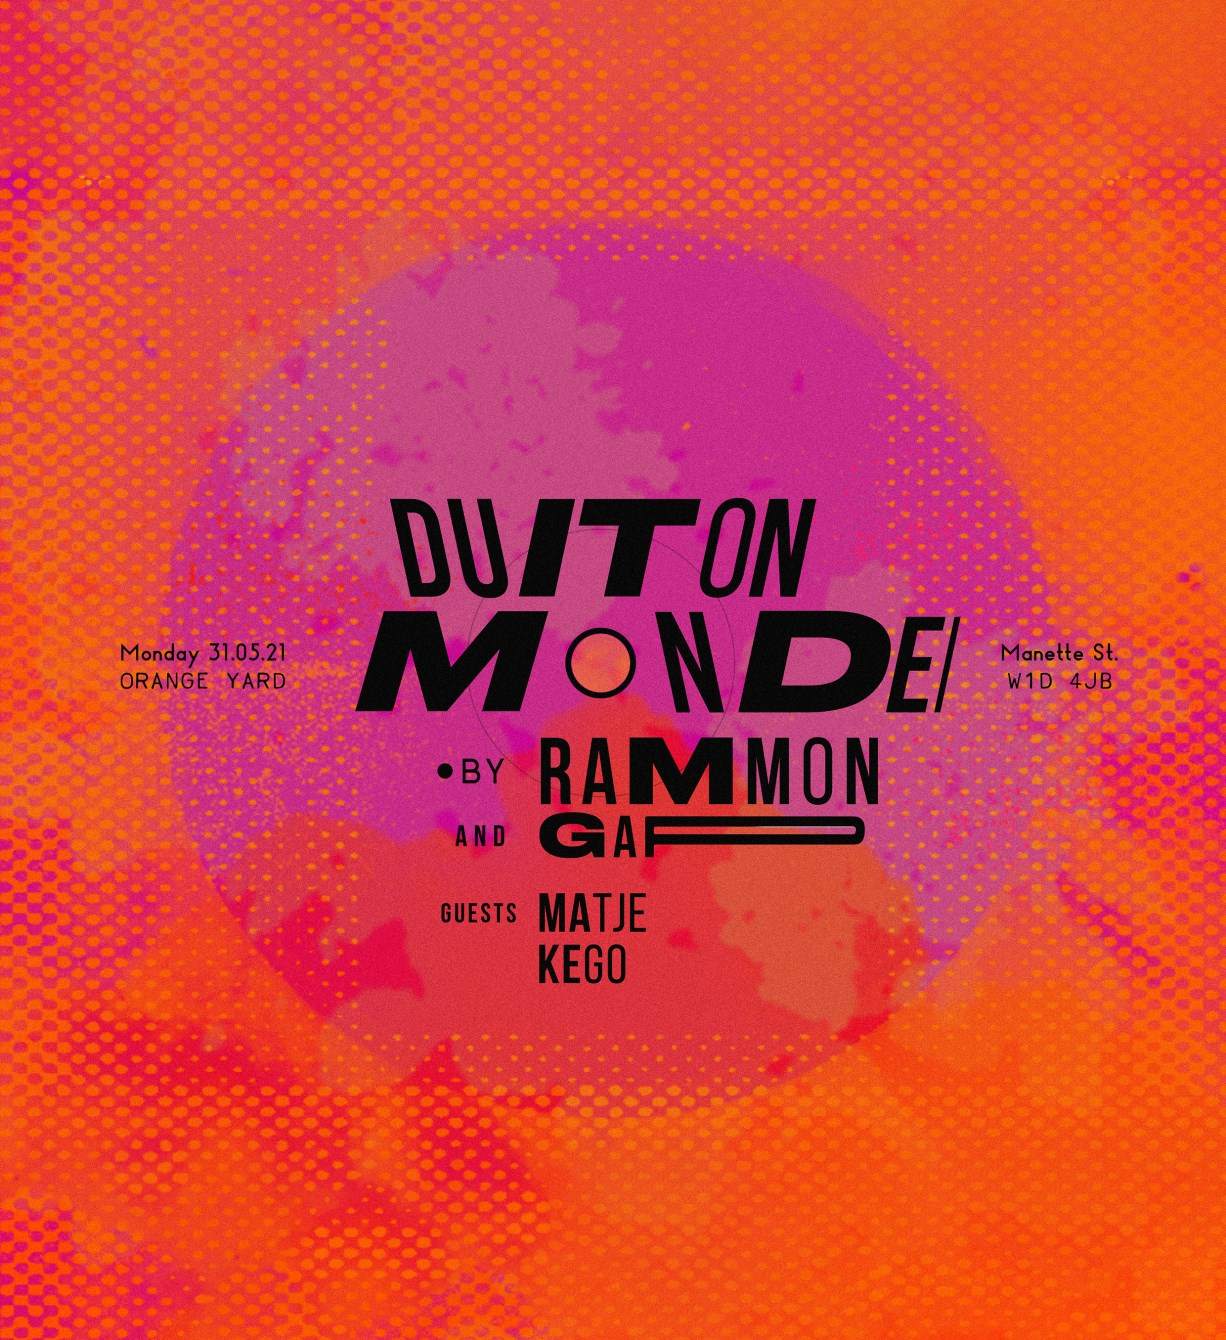 Duit On Mon Dei Special Bank Holiday - フライヤー表